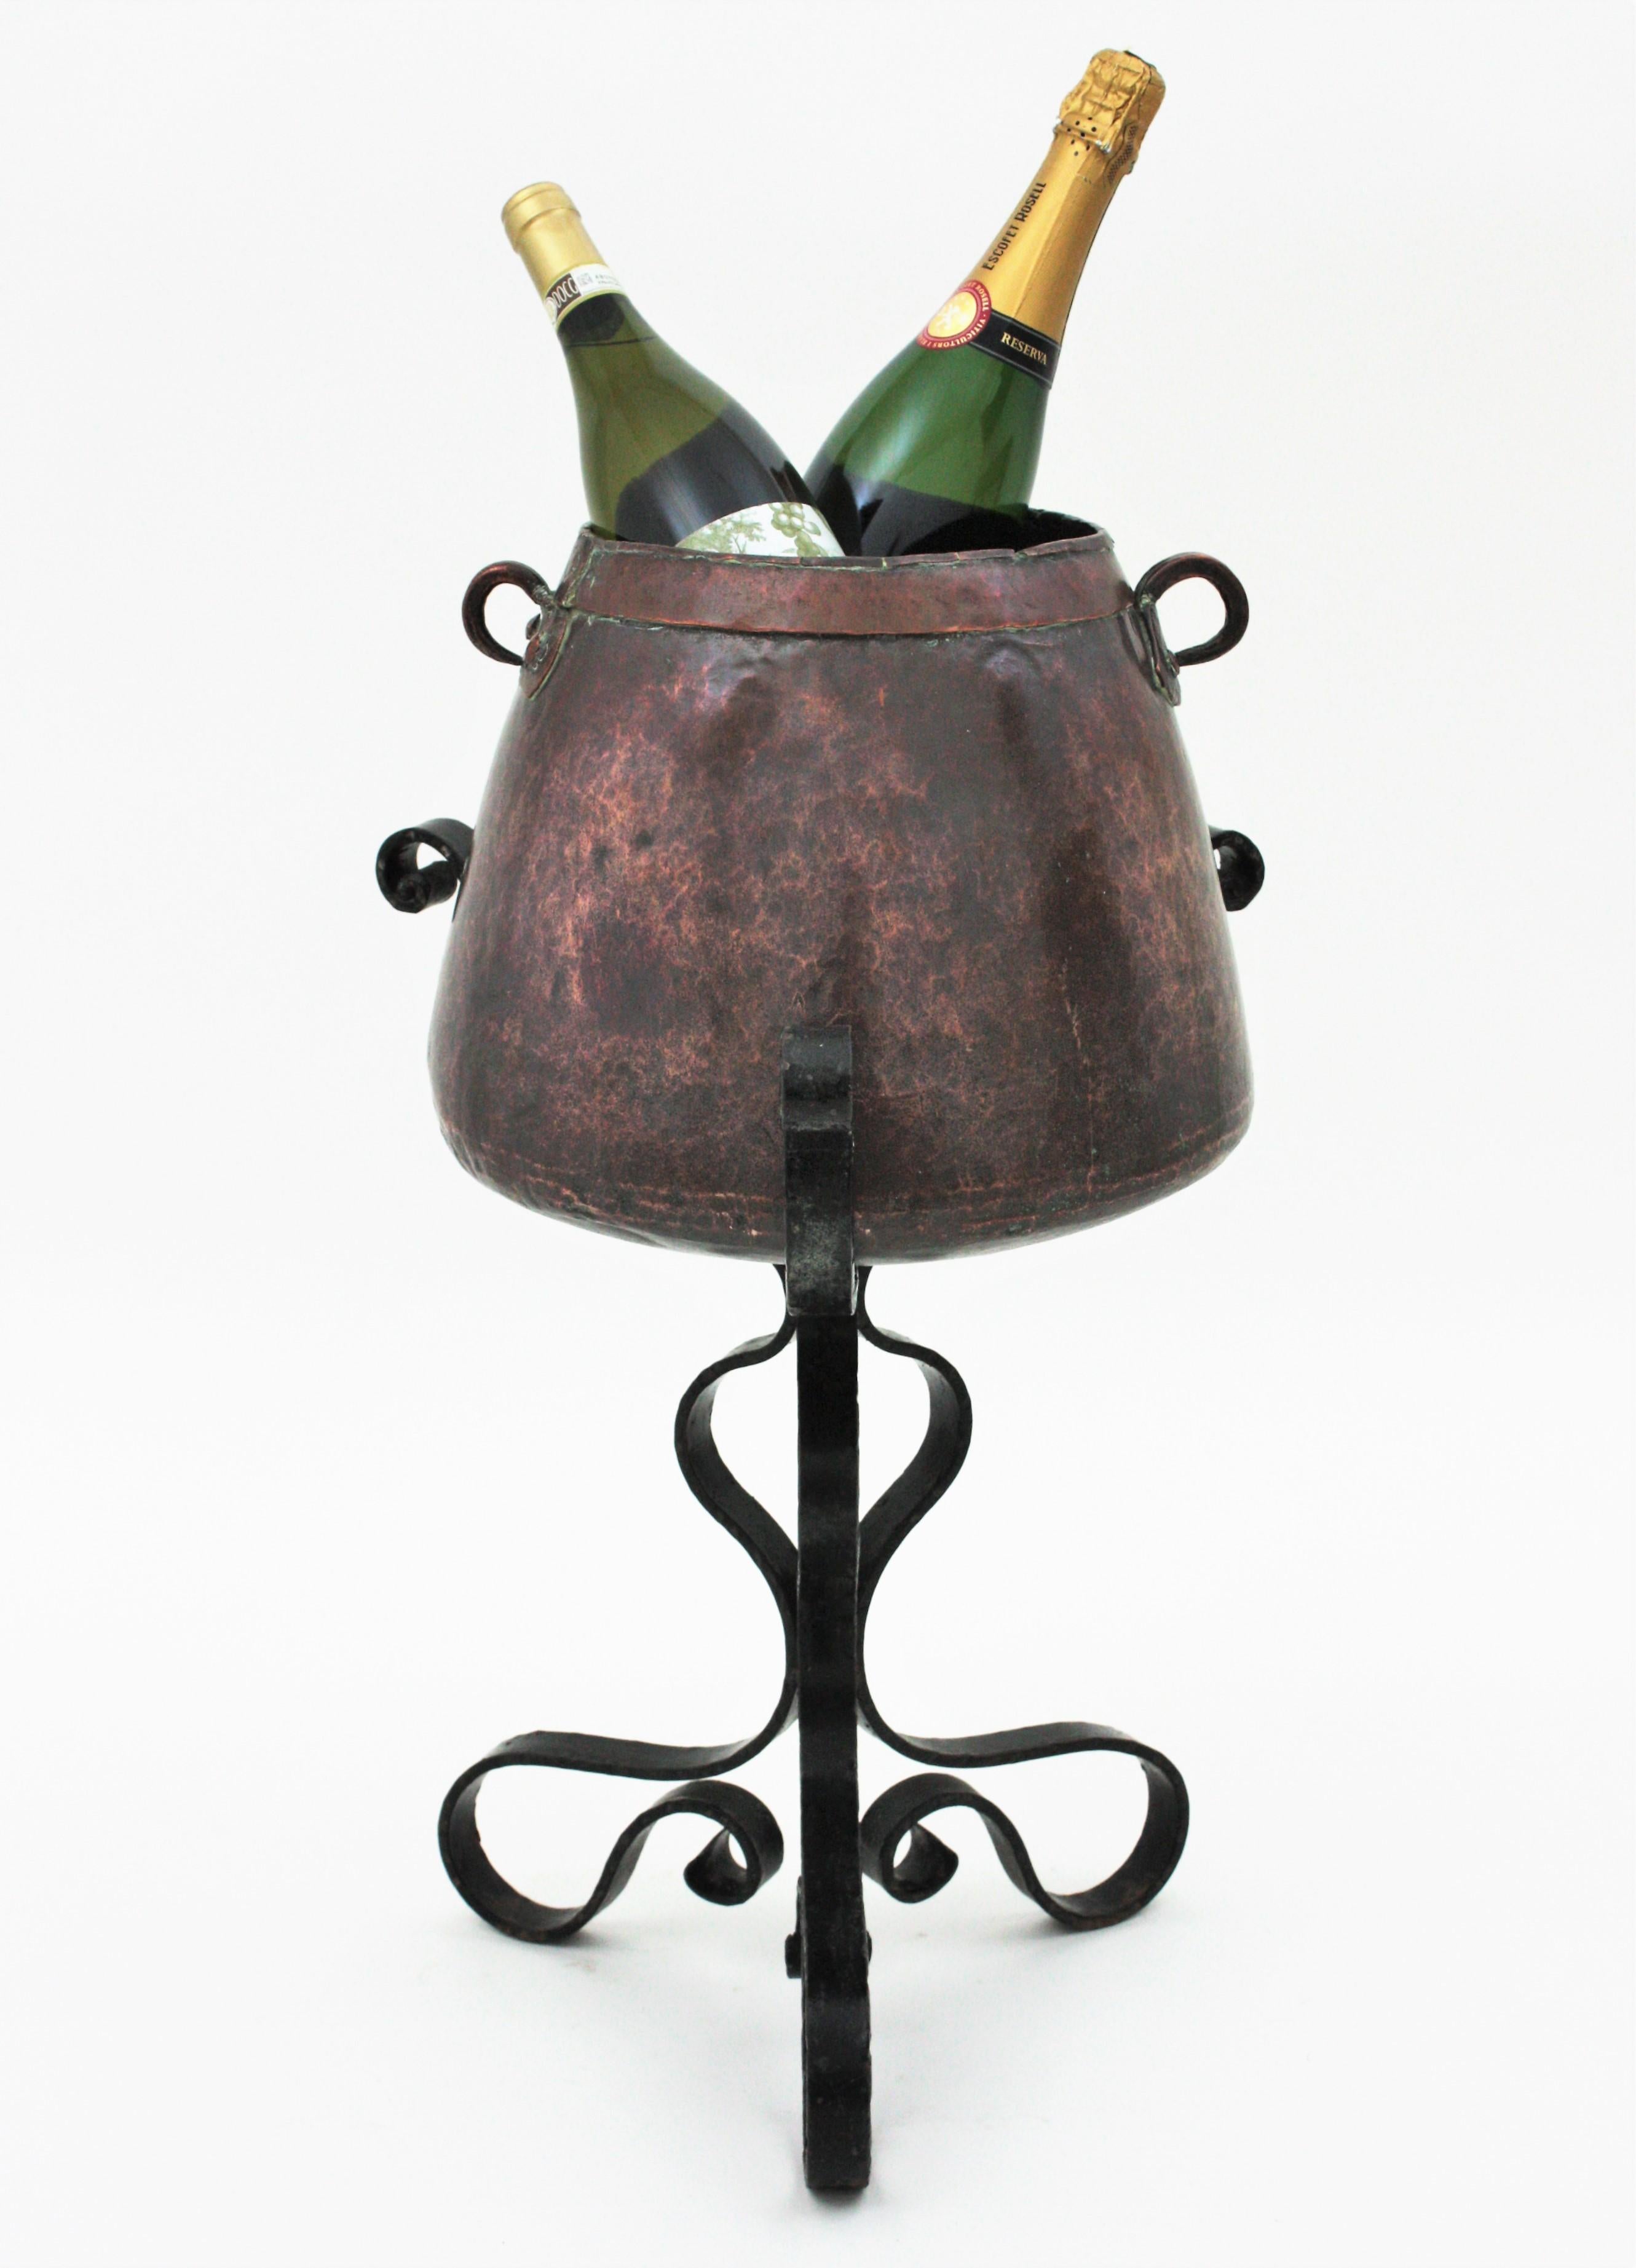 Rustic Cauldron Ice Bucket Champagne Cooler on Tripod Stand, Copper and Iron For Sale